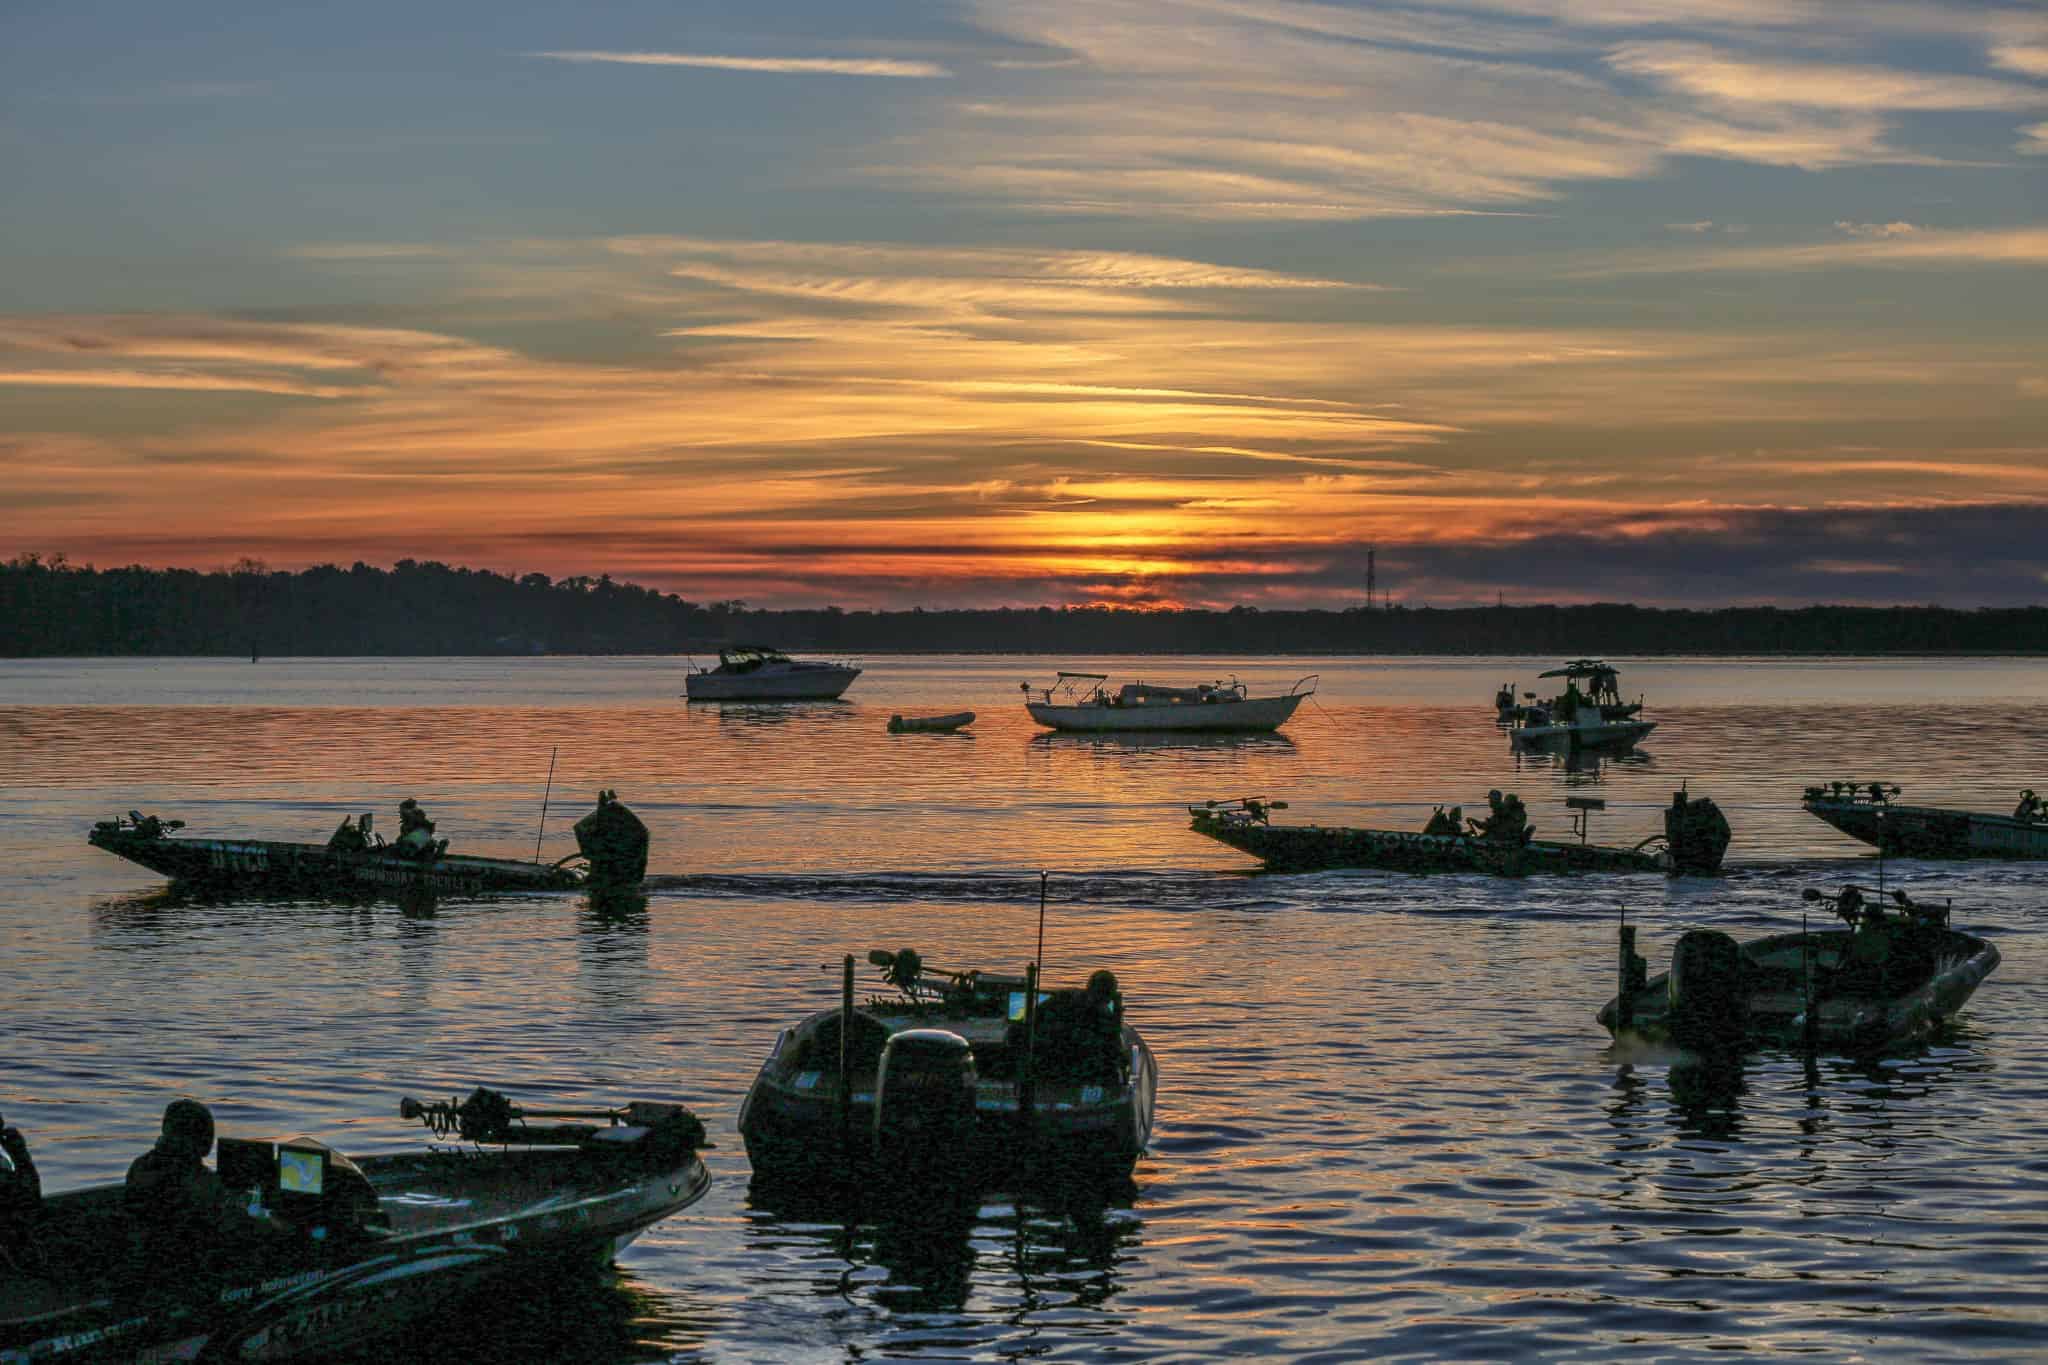 B.A.S.S. Officials Announce 2022 Schedule For Bassmaster Elite Series | BassFIRST